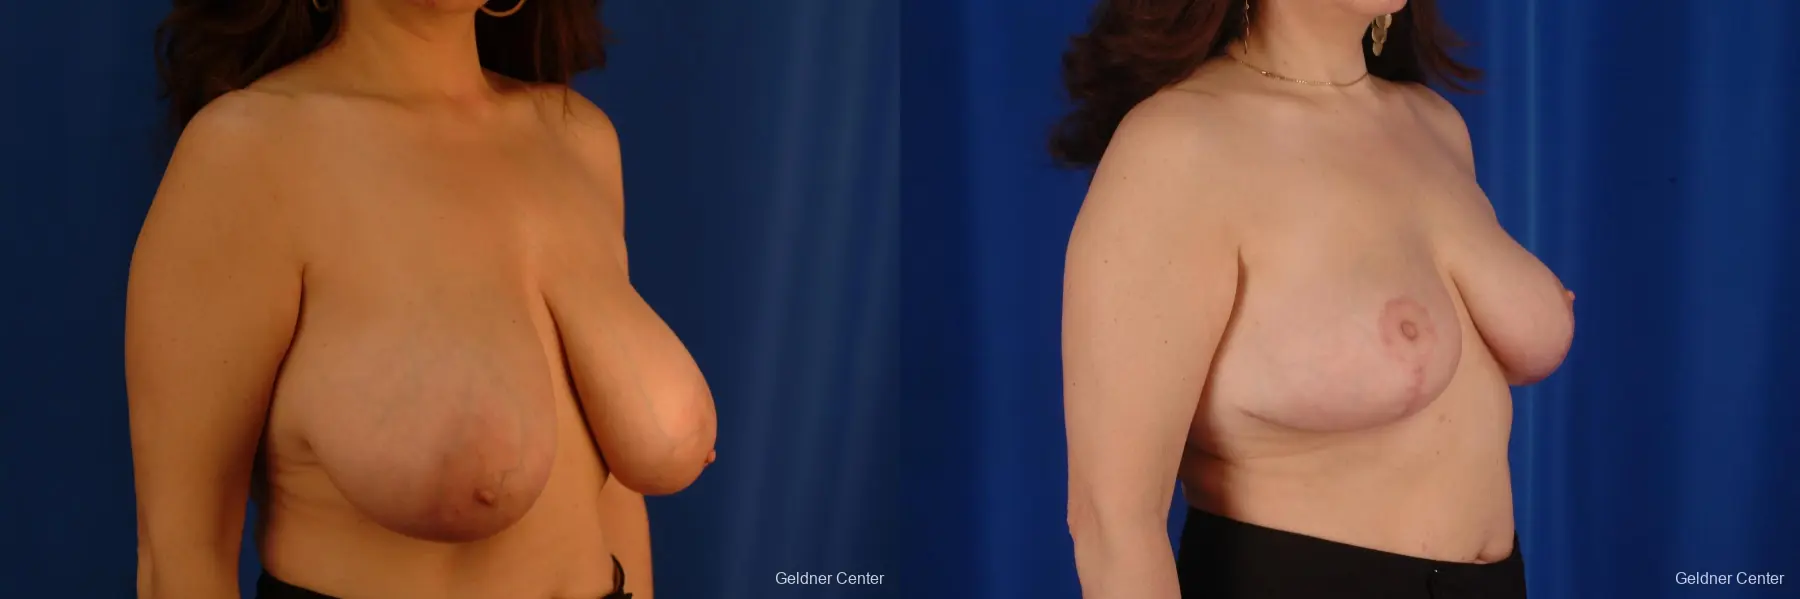 Breast Reduction Streeterville, Chicago 2289 - Before and After 3